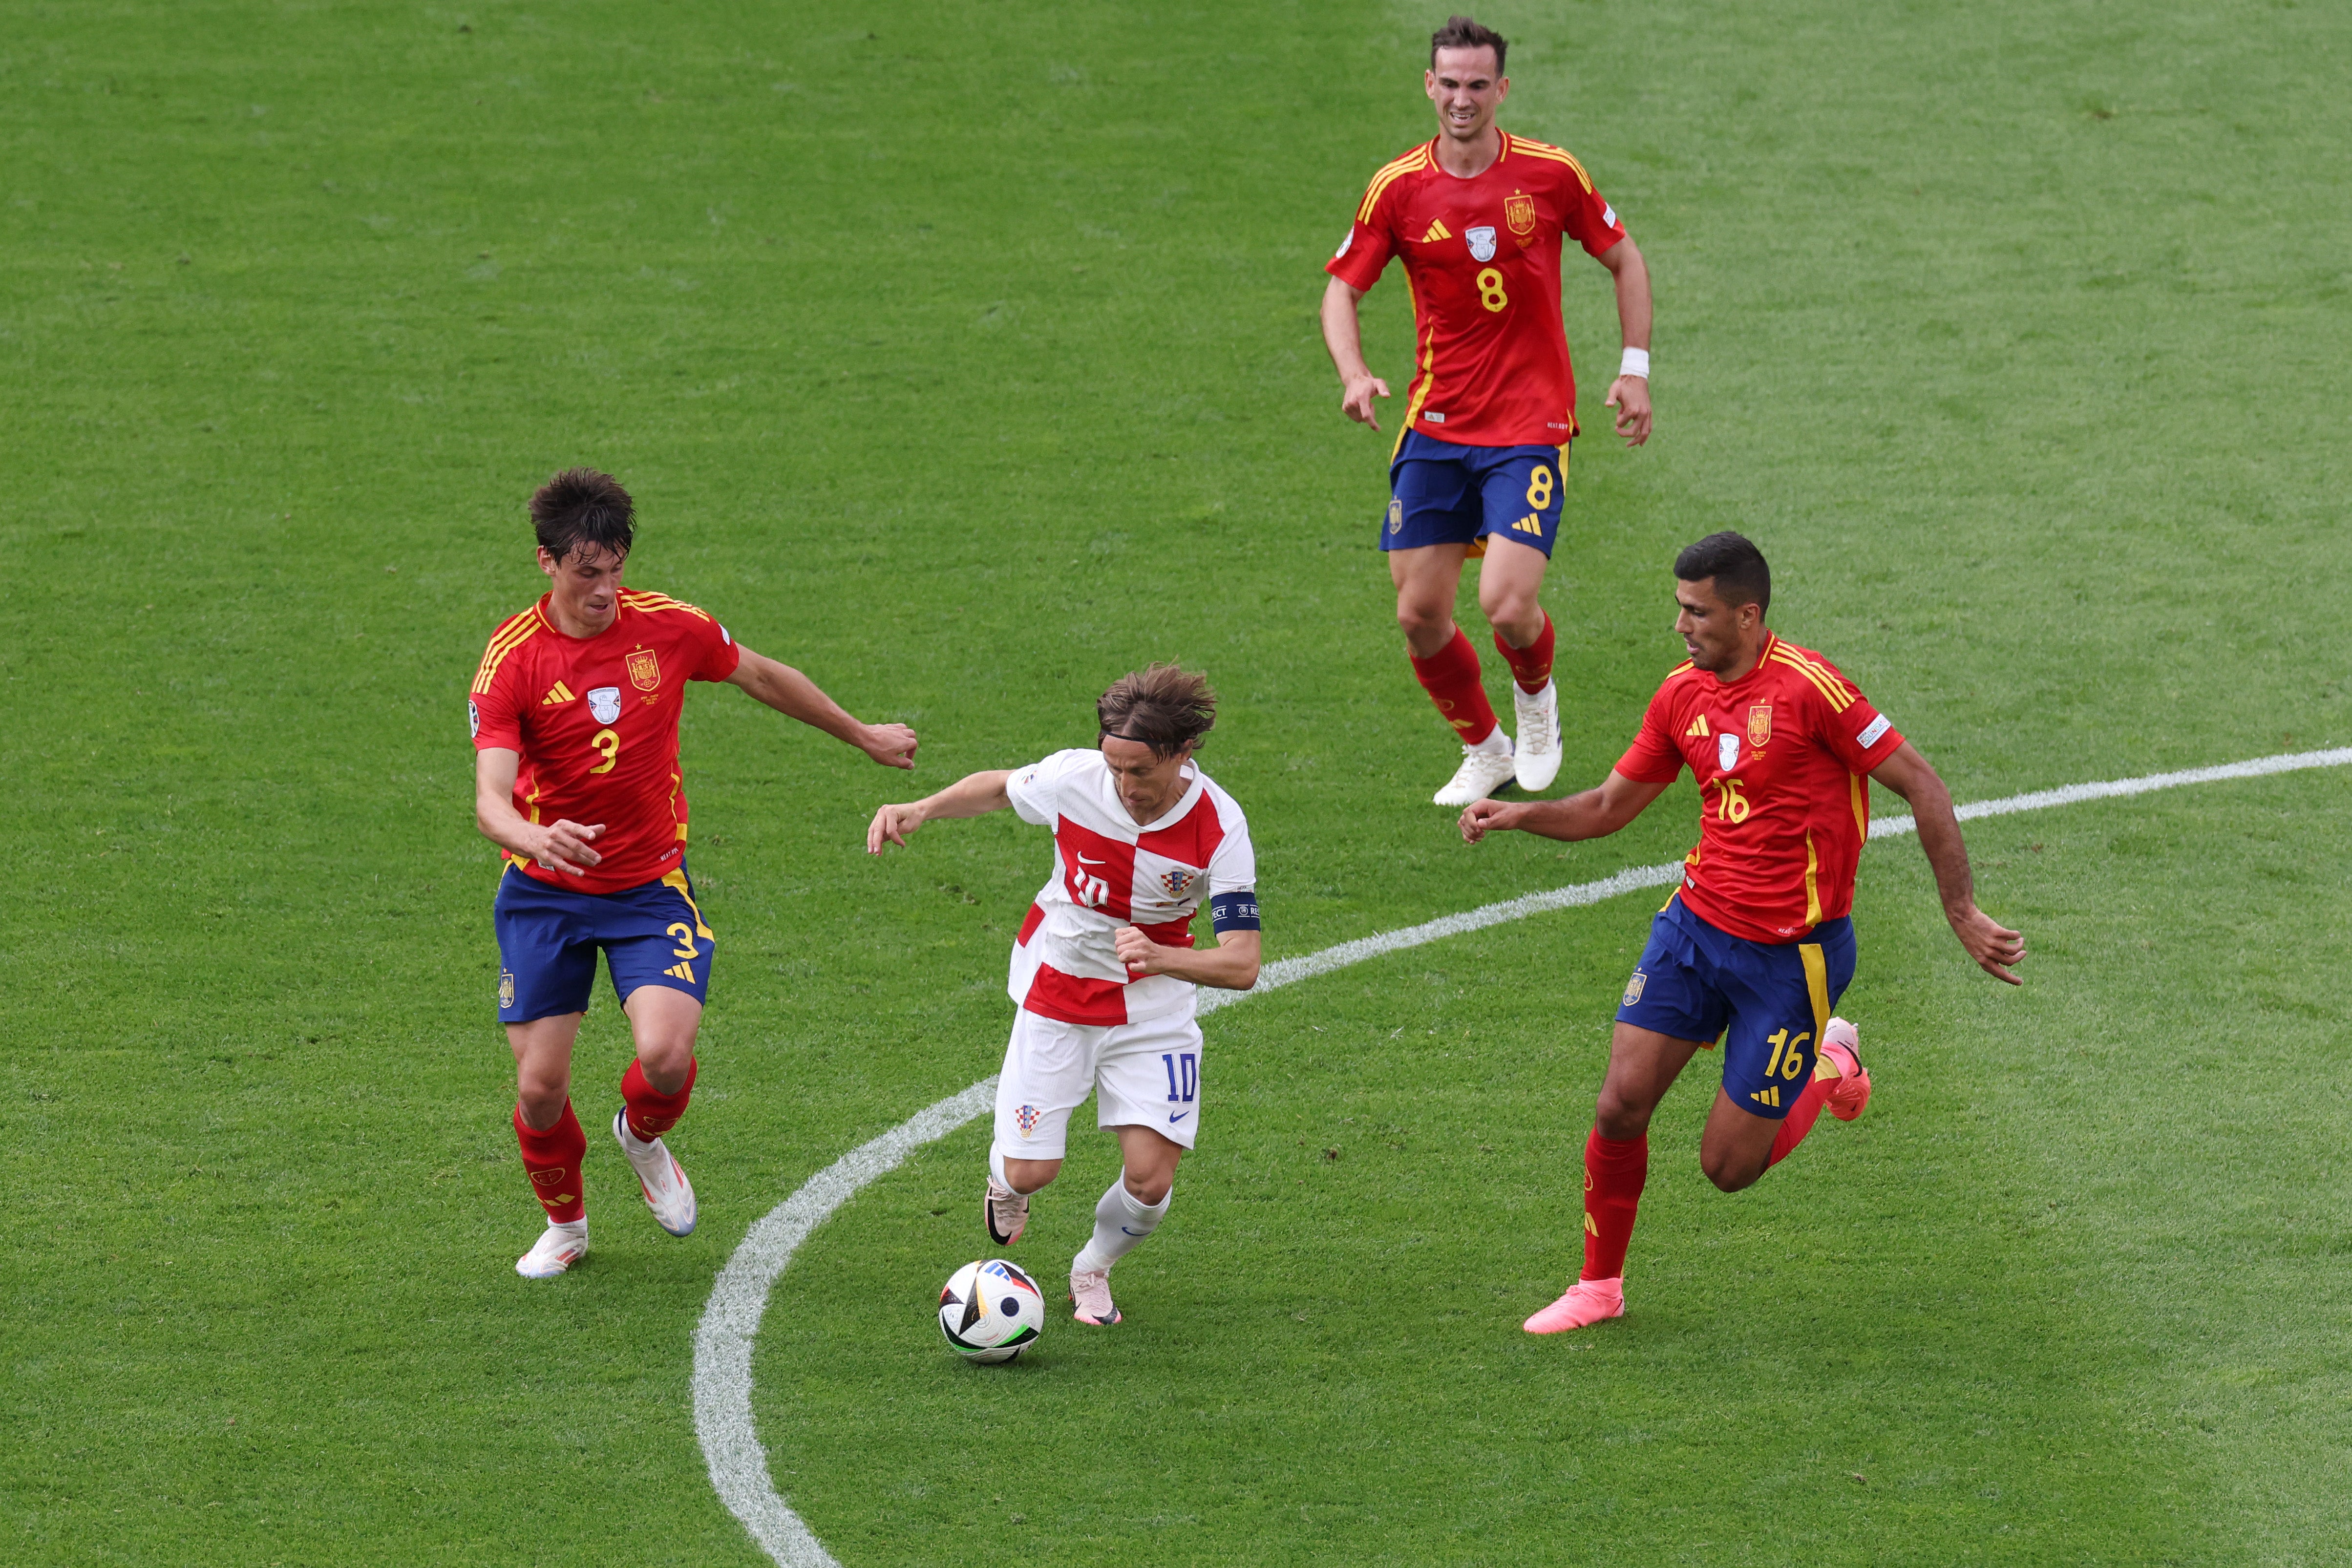 Modric (centre) did well to bring his team into the game, but Croatia were still well beaten